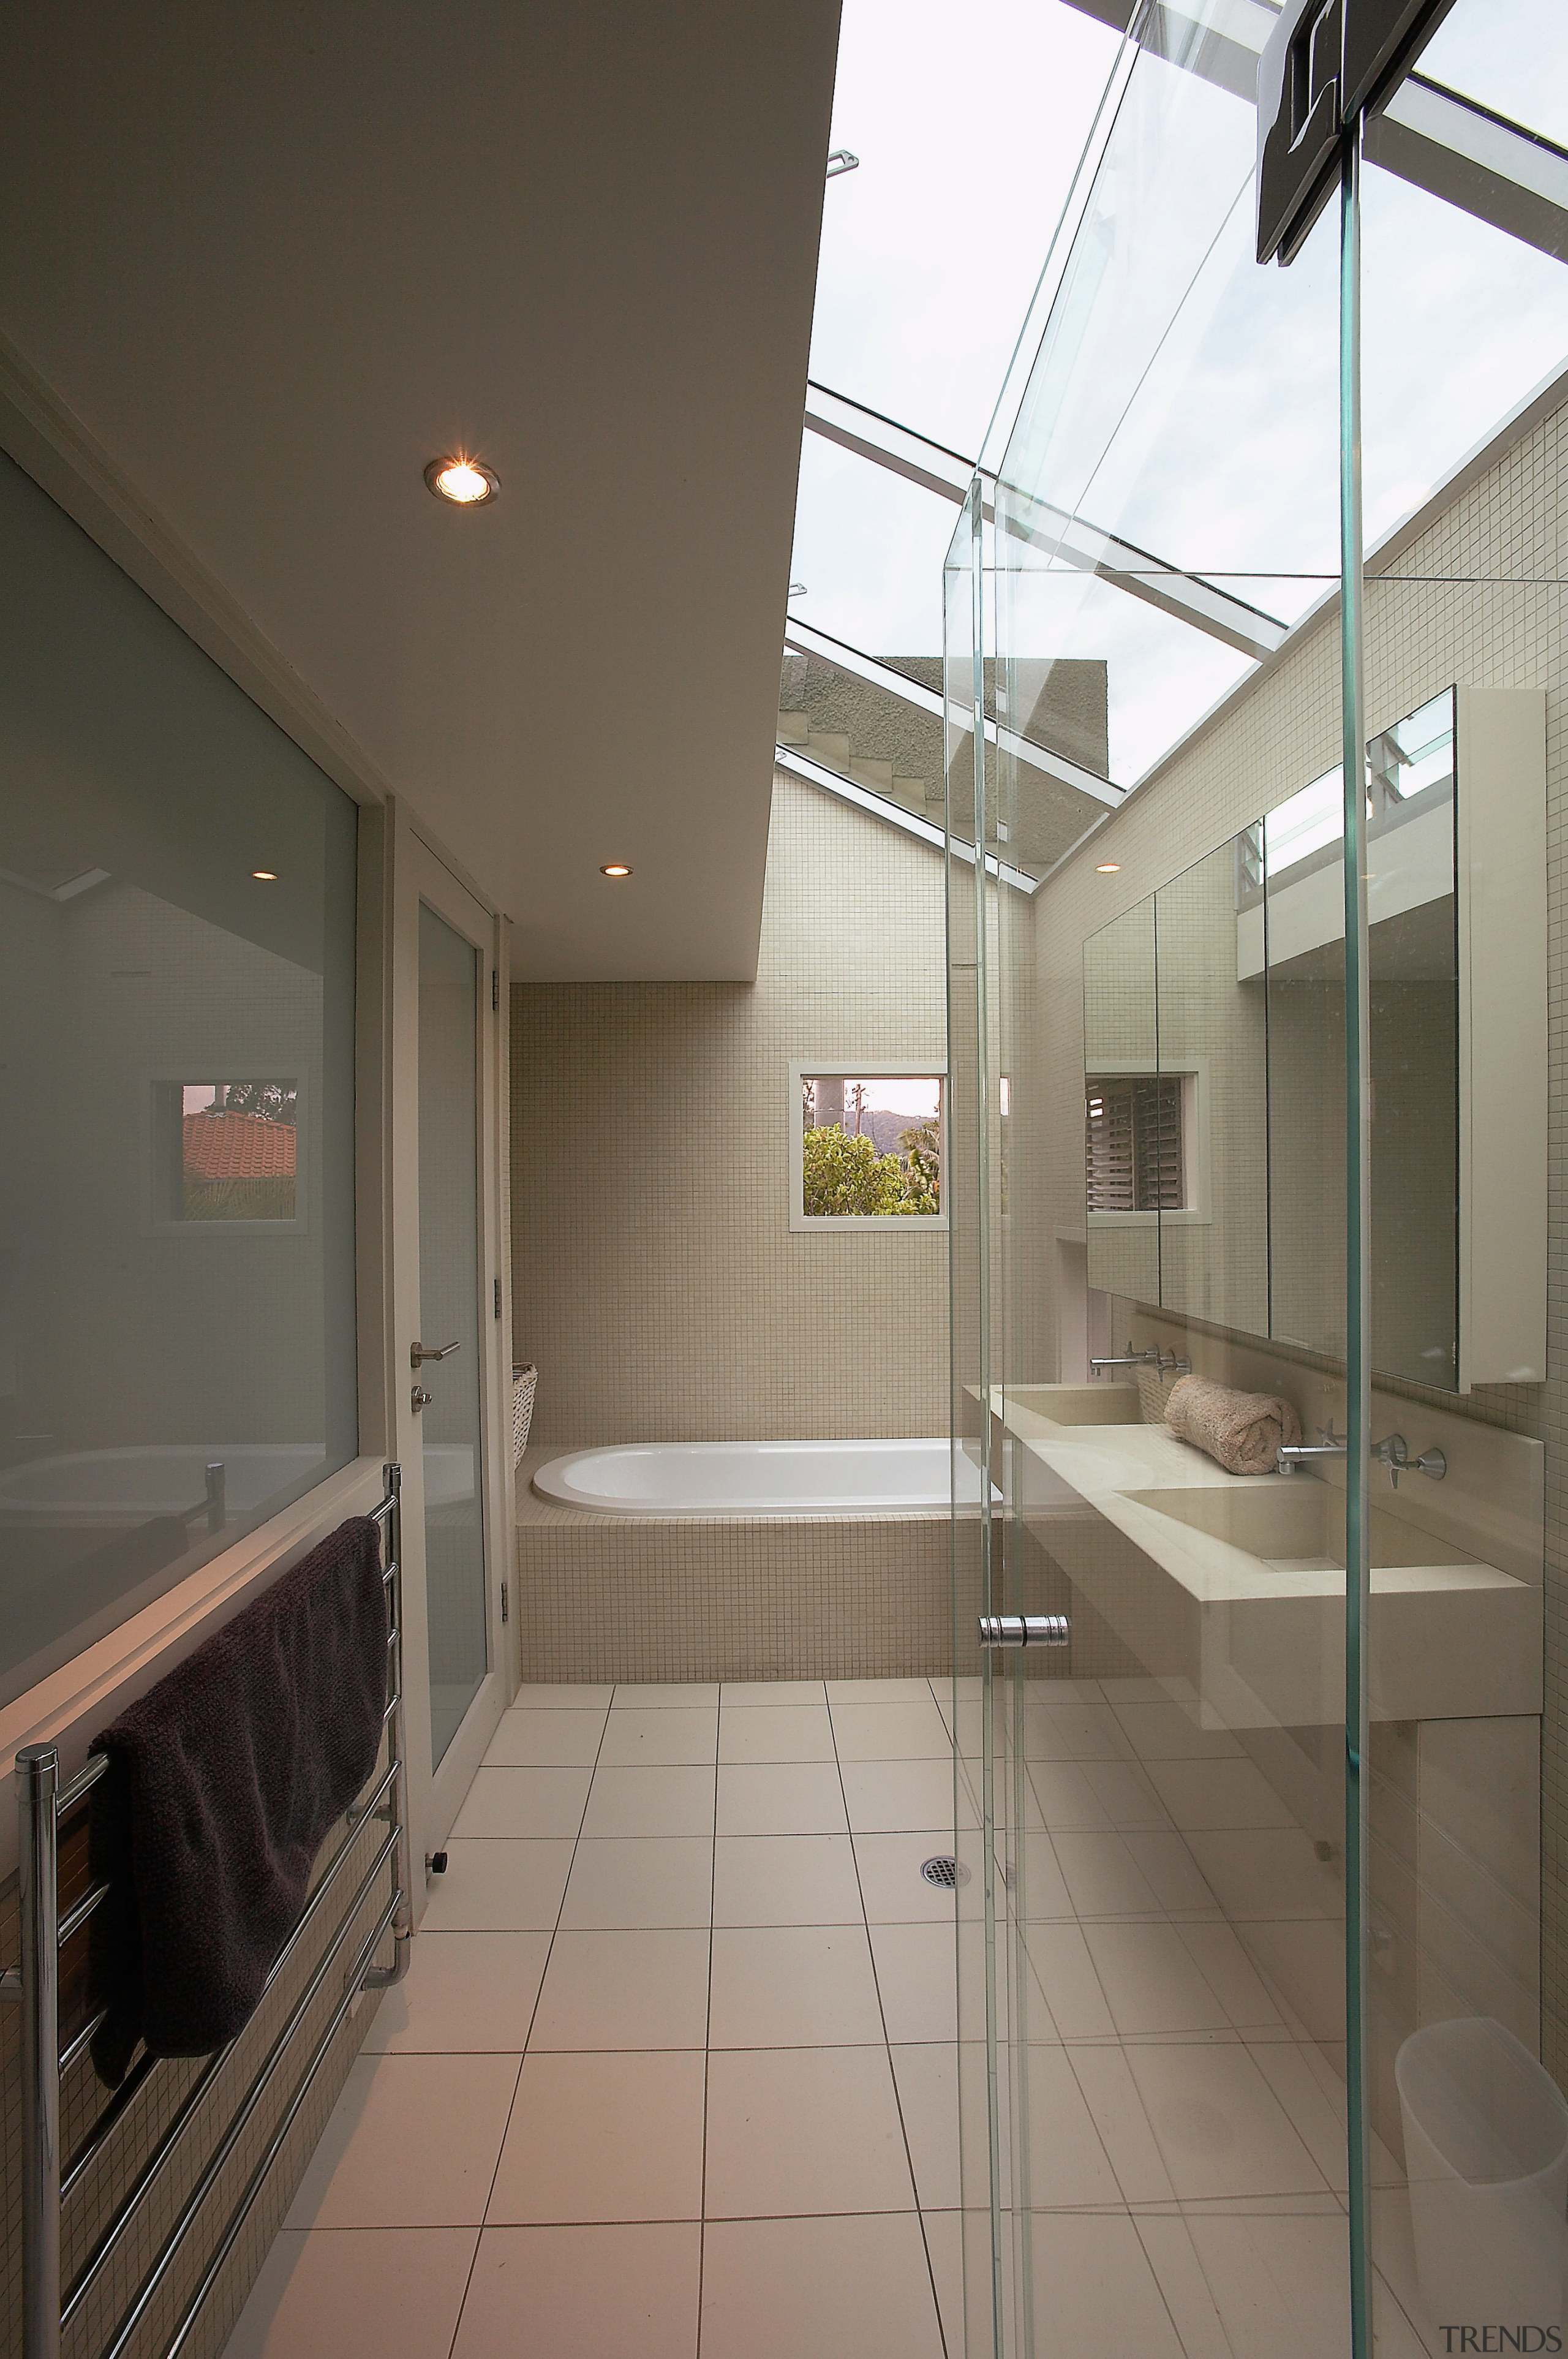 A view of the bathrom featuring tiled walls/flooring, architecture, ceiling, daylighting, floor, glass, interior design, real estate, window, gray